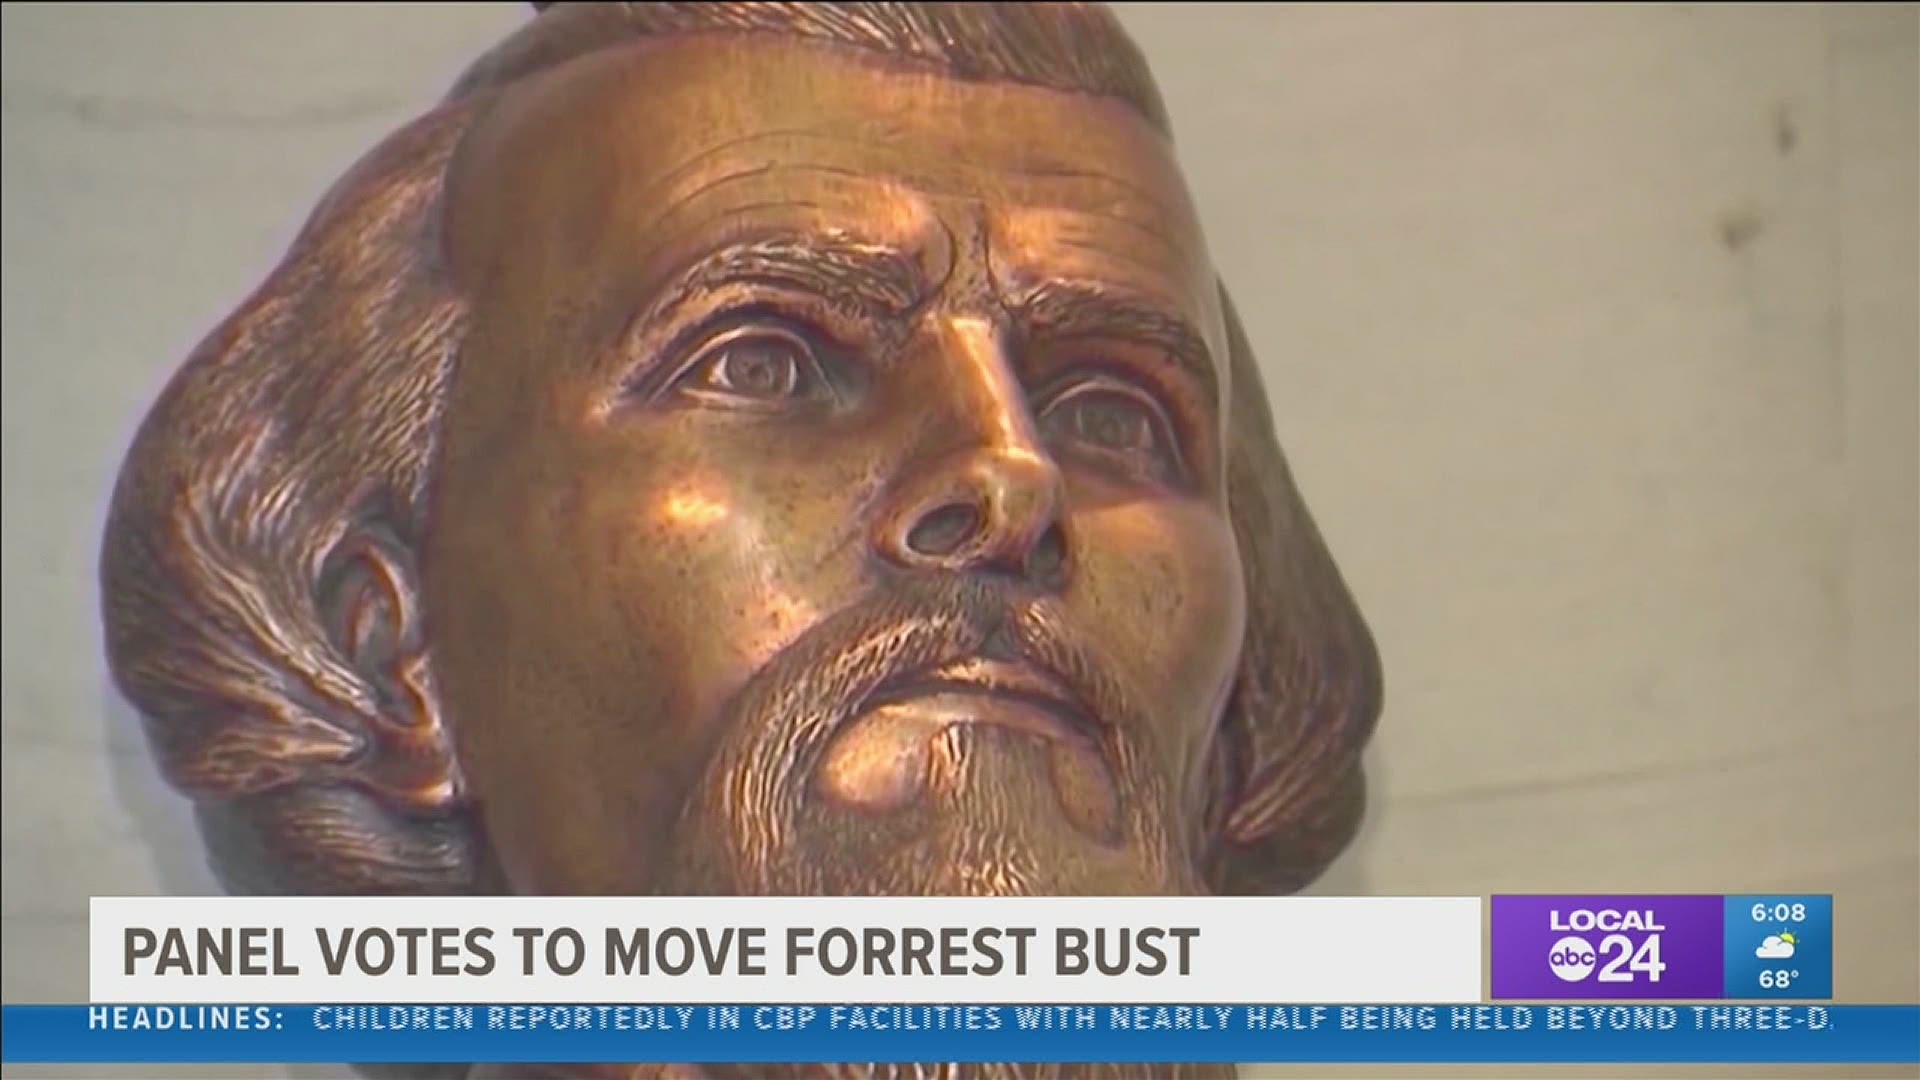 The Tennessee Historical Commission voted 25-1 on Tuesday to move the Nathan Bedford Forrest bust to the Tennessee State Museum.